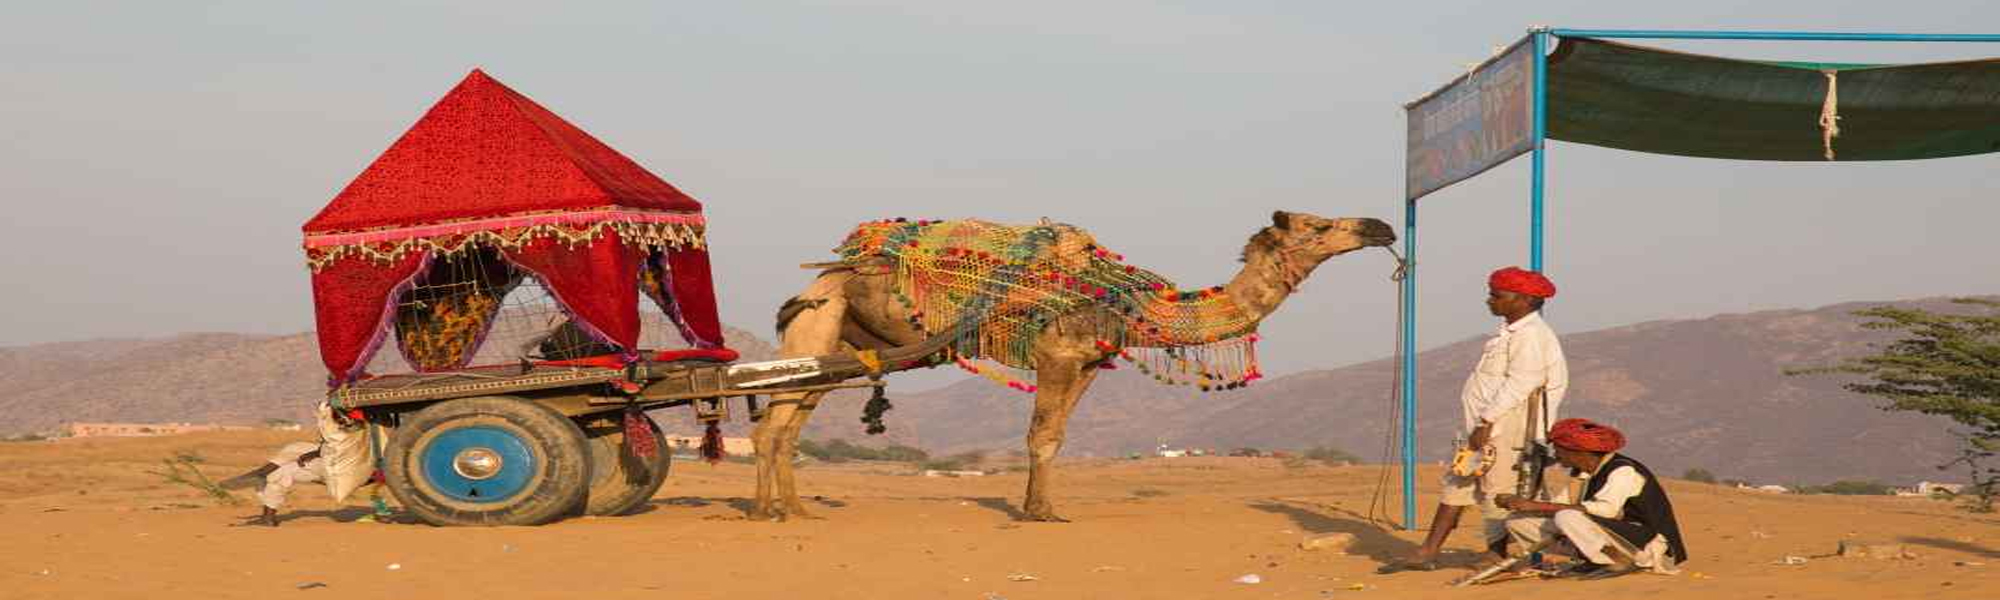 Camel Safari Tours in India with Heritage Tours in India